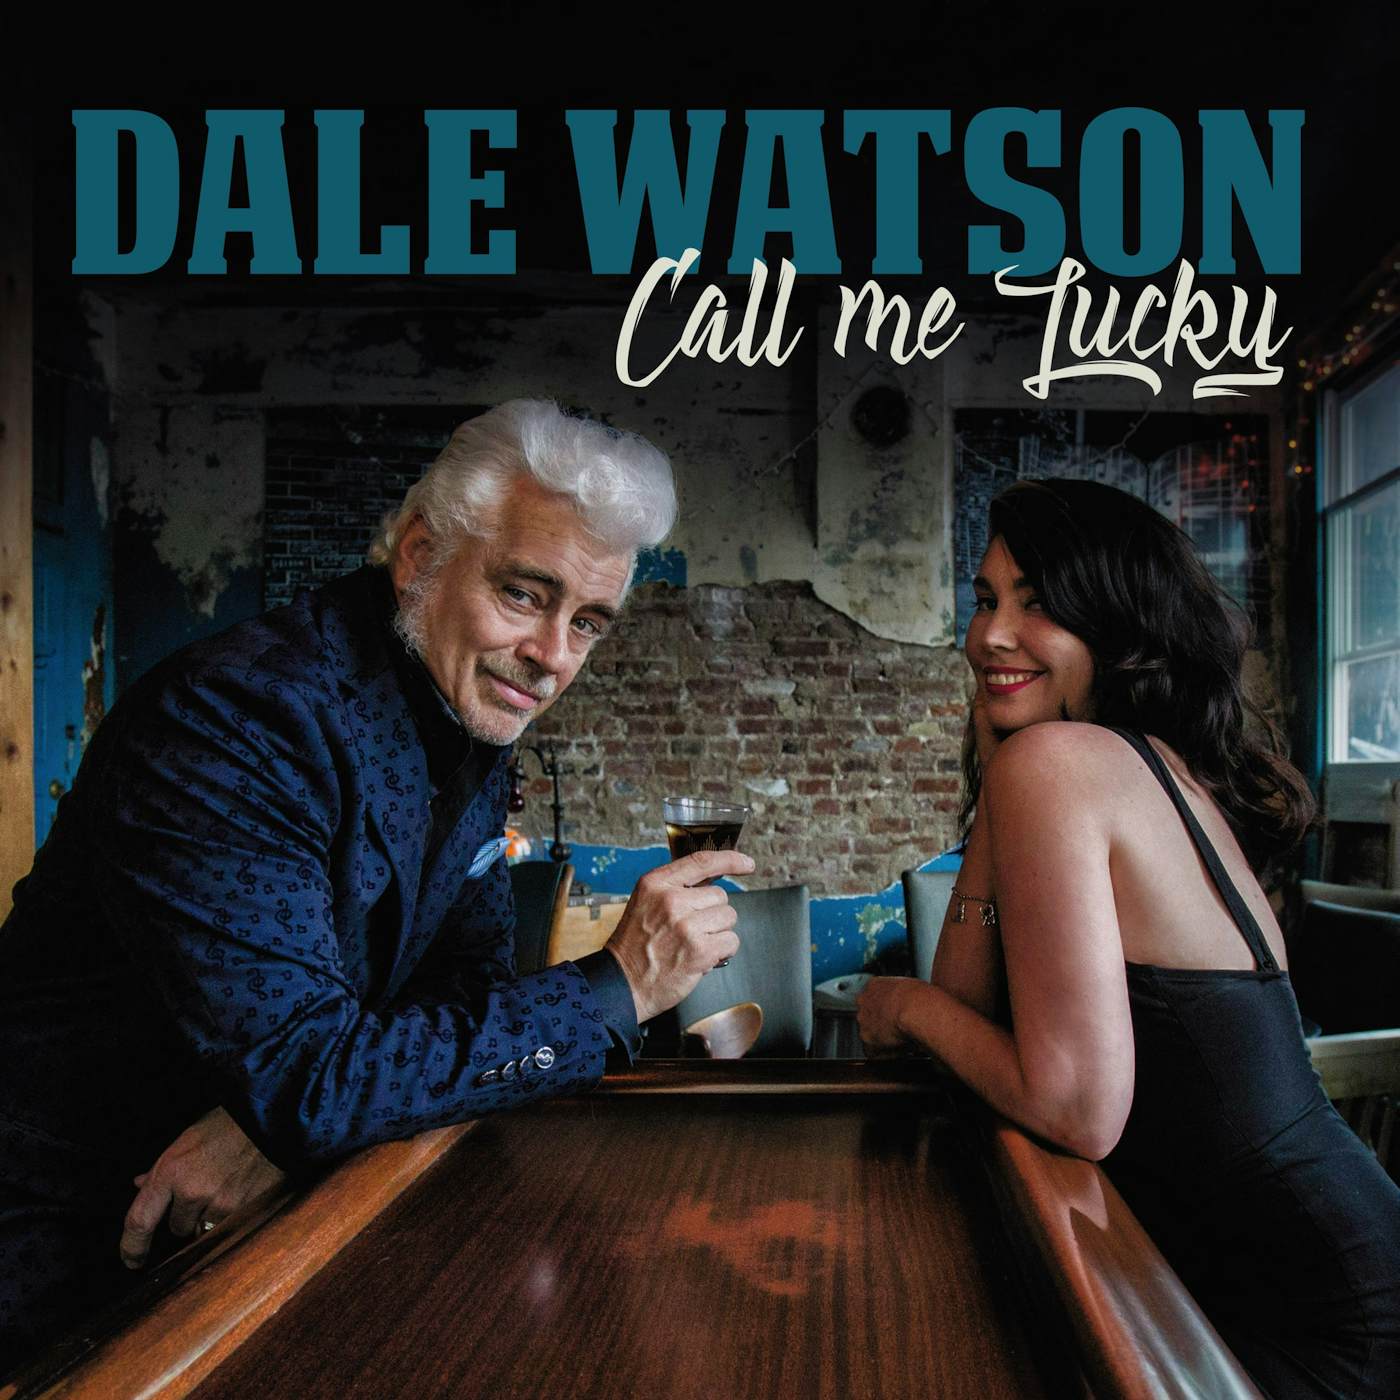 Dale Watson Call Me Lucky Vinyl Record